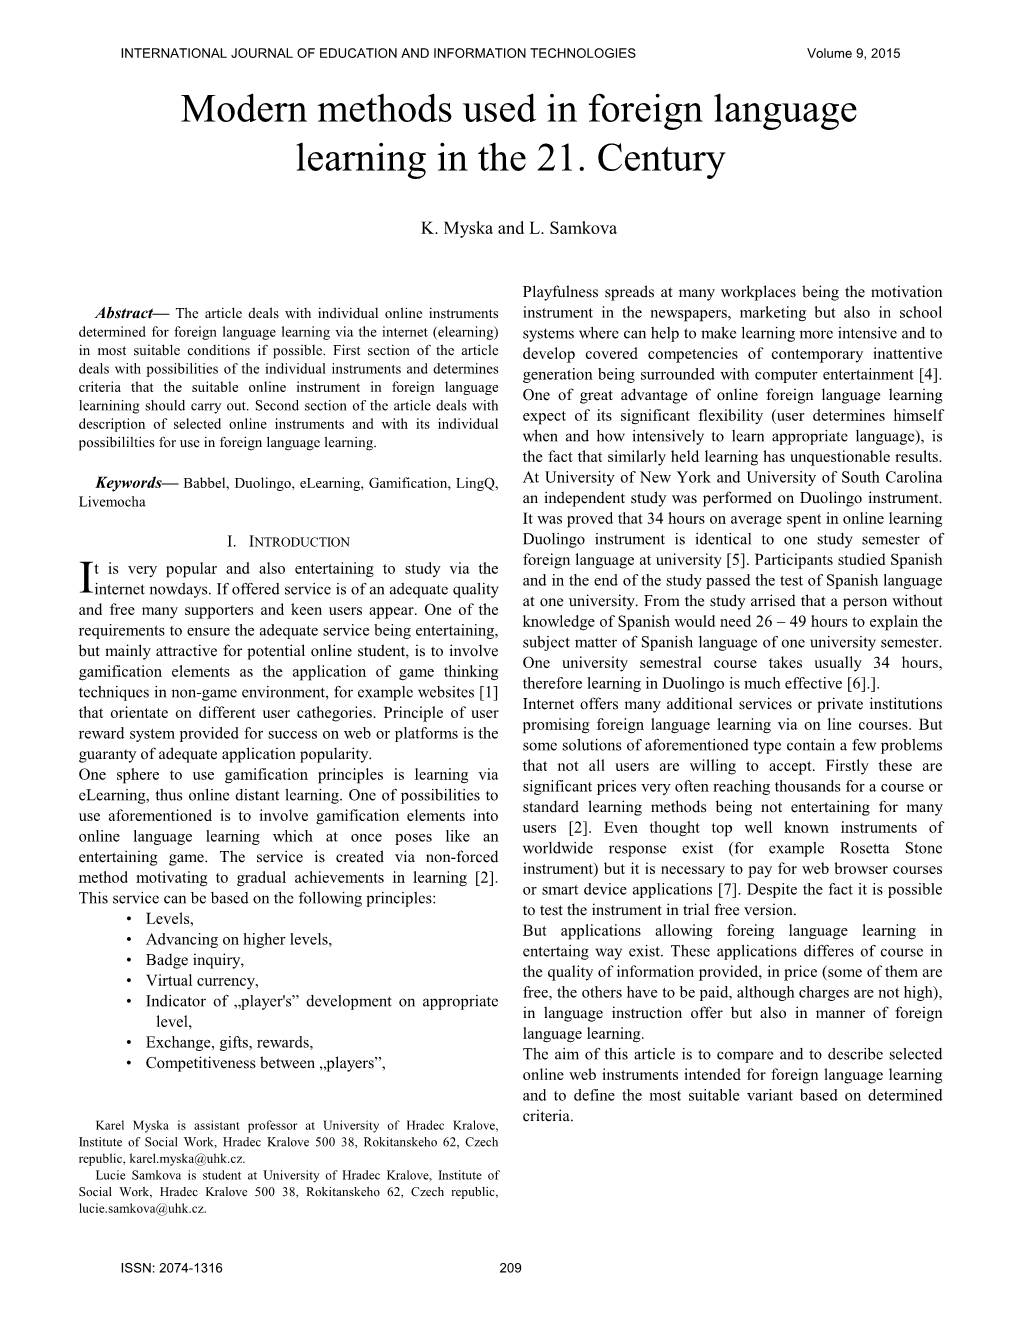 Modern Methods Used in Foreign Language Learning in the 21. Century